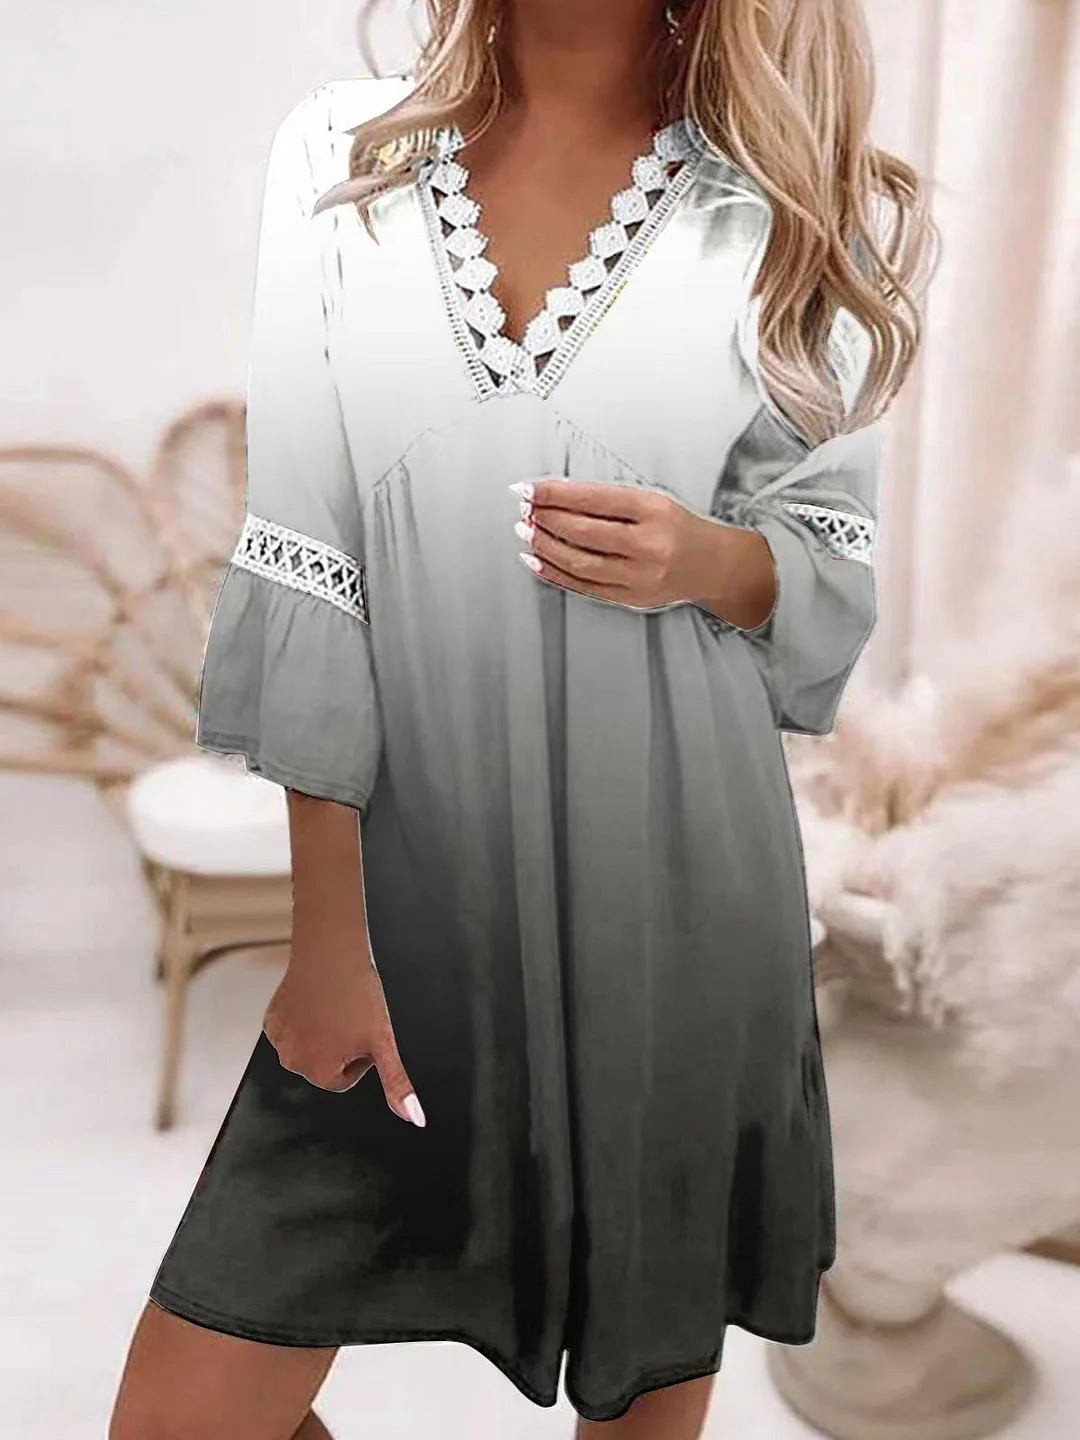 Women's 3/4 Sleeve V Neck Gradient Lace Casual Dress